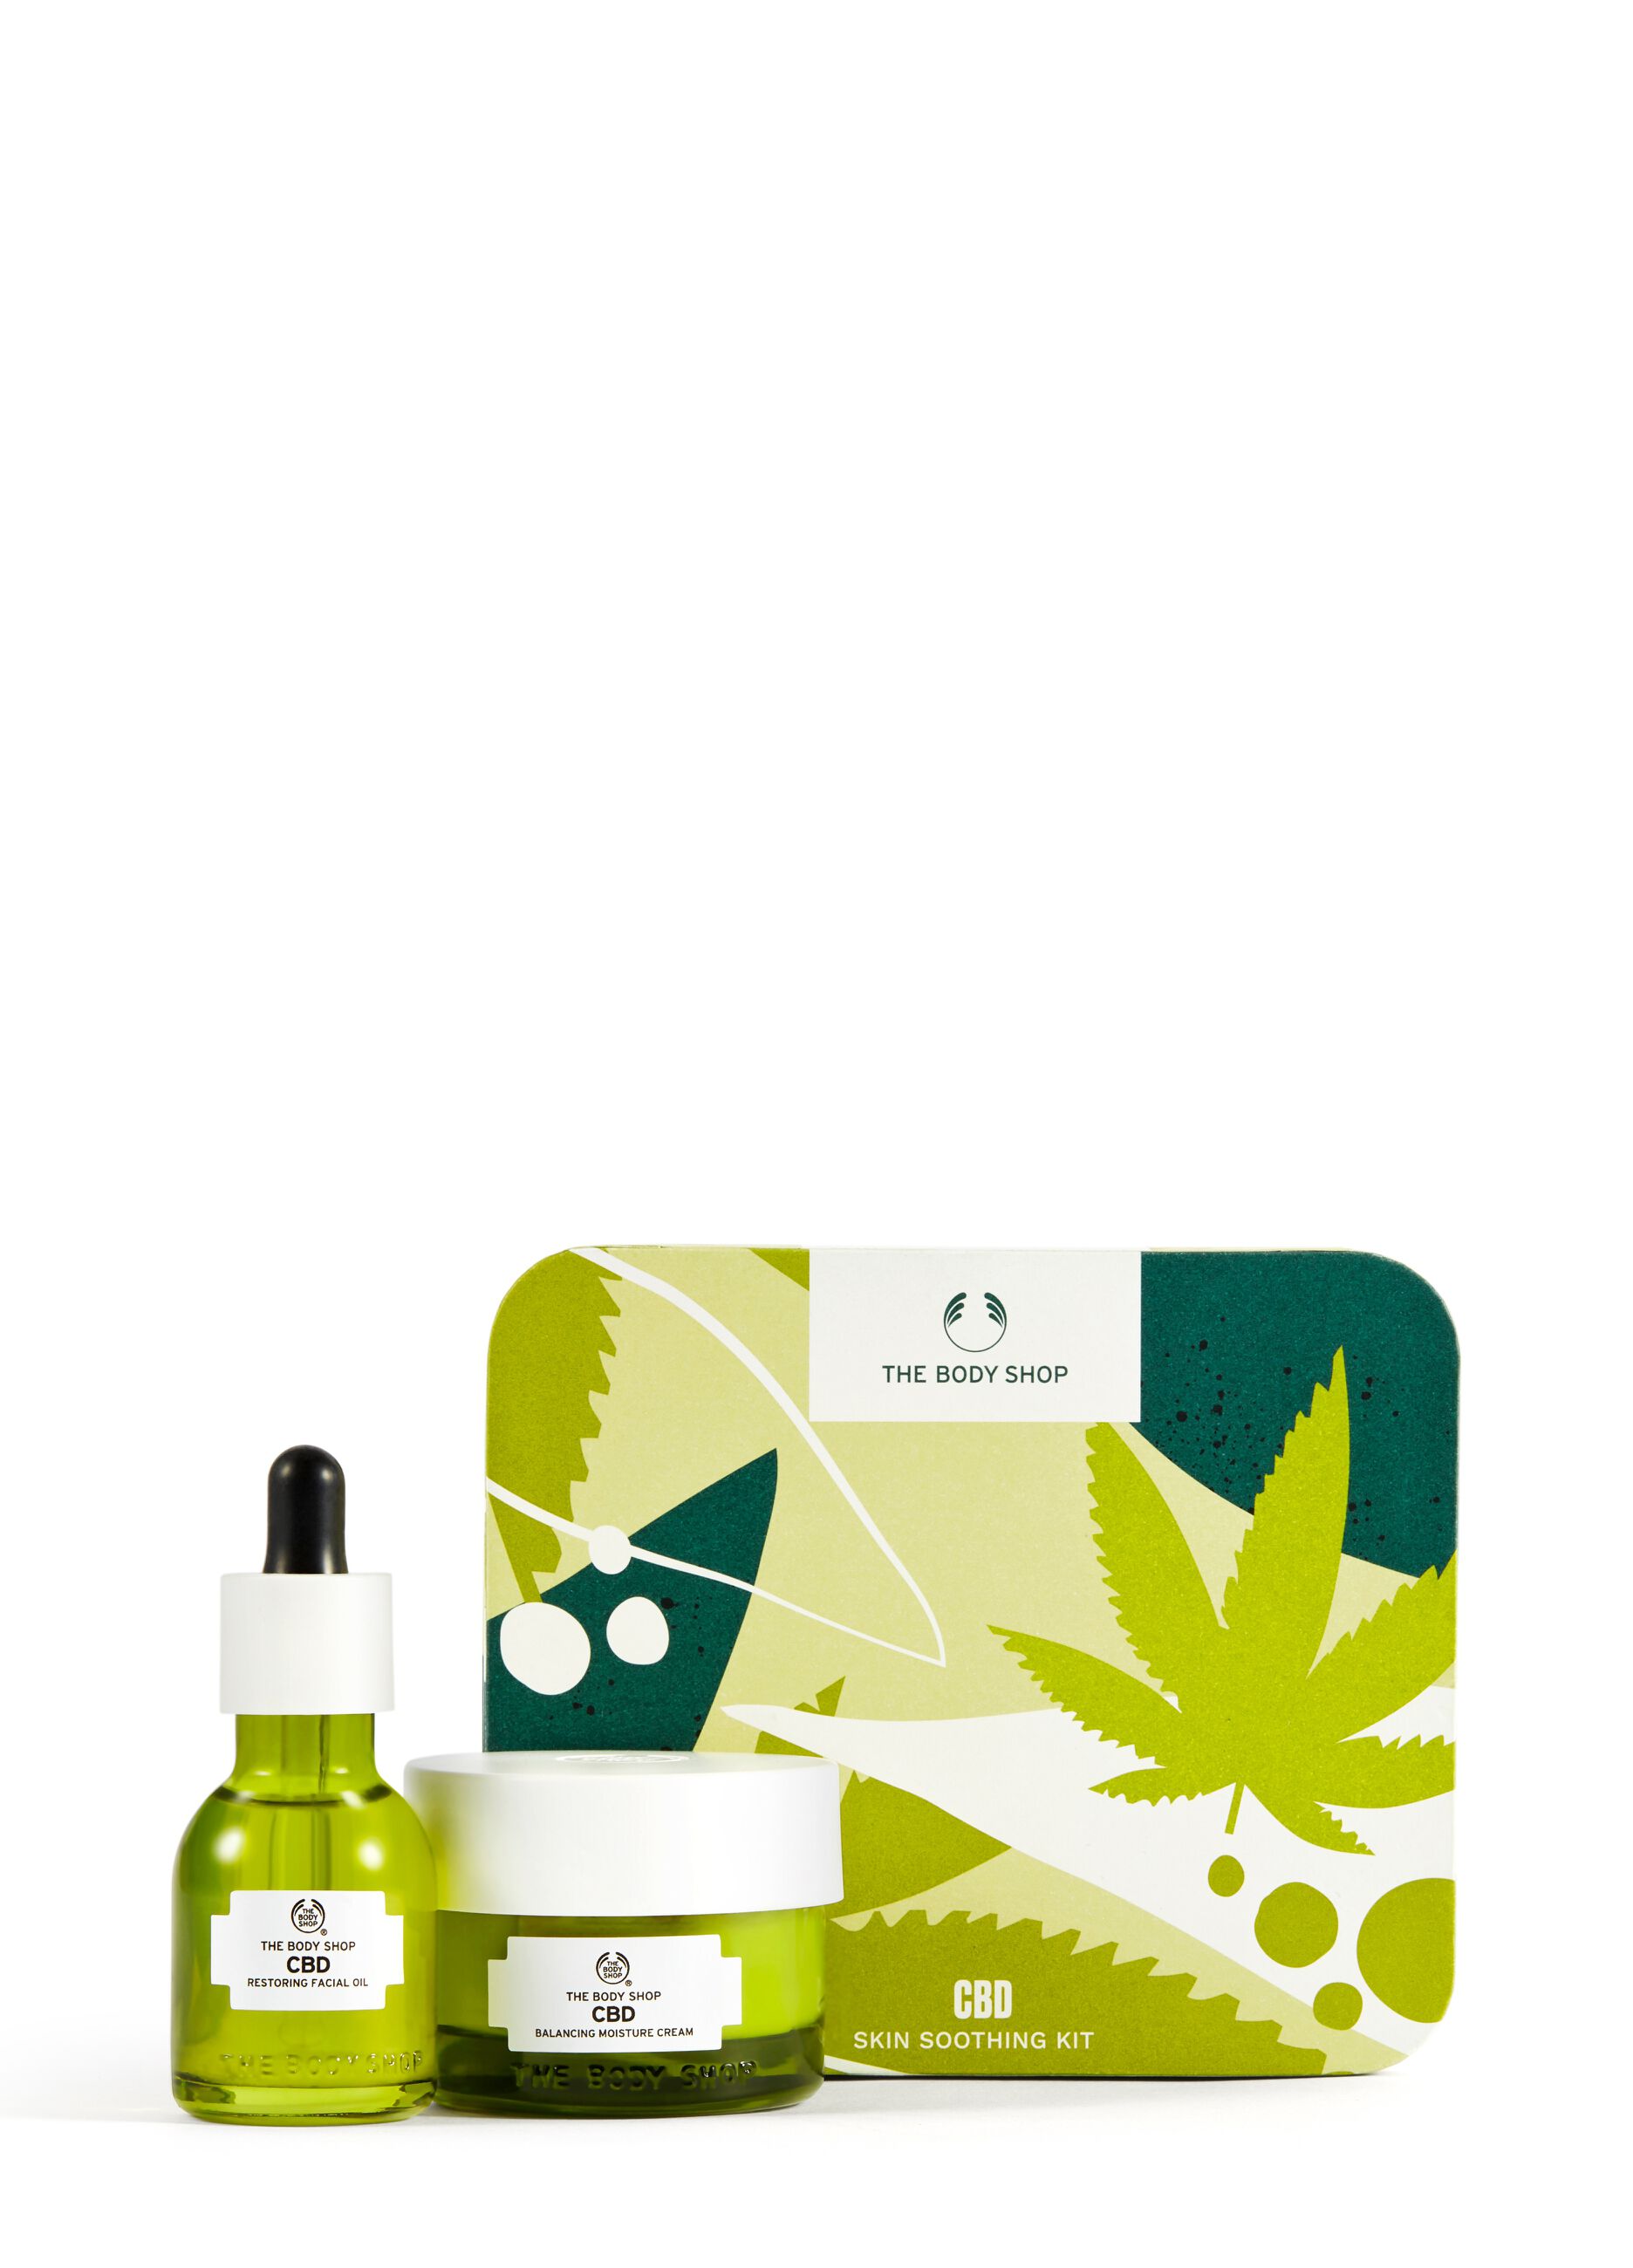 The Body Shop soothing kit with CBD